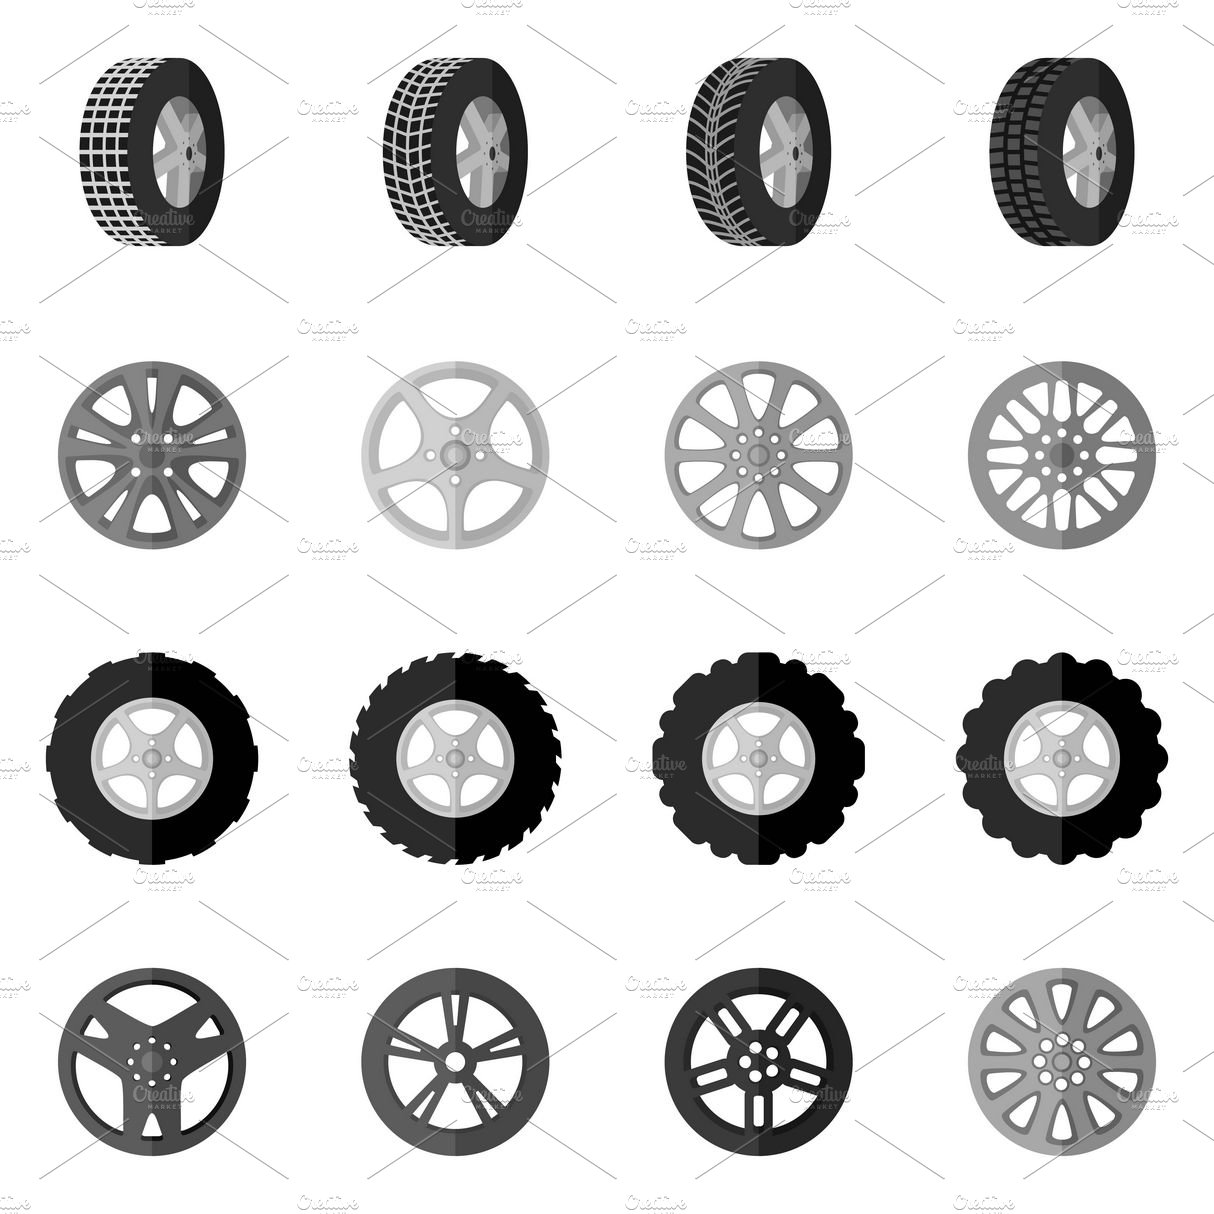 Tire service montage icon set cover image.